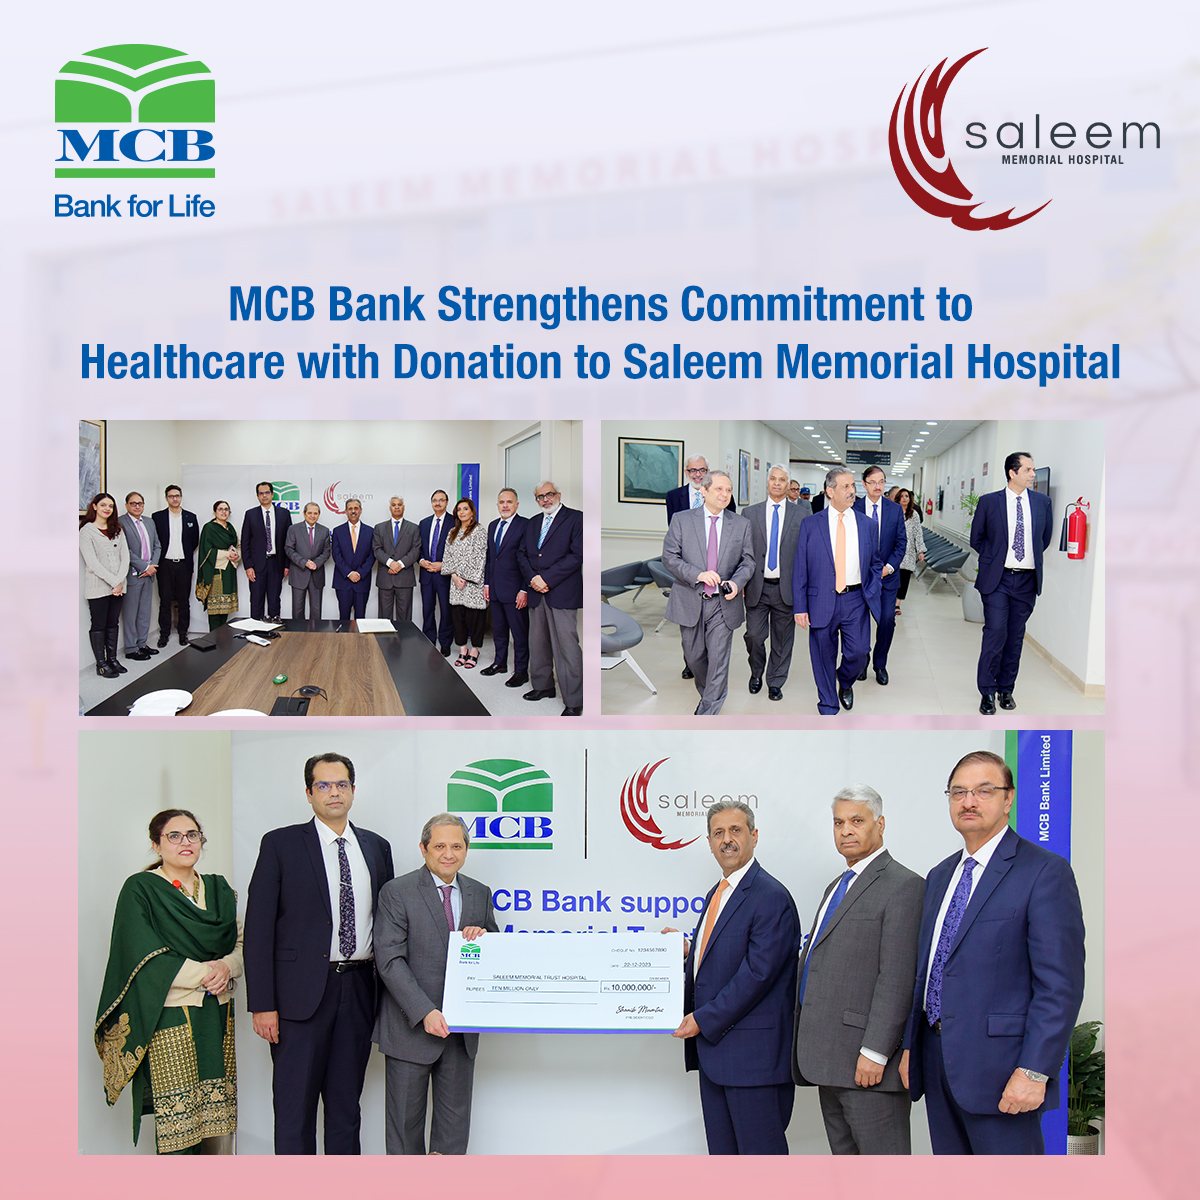 As a steadfast advocate for healthcare initiatives, MCB Bank has donated a sum of PKR 10 million to Saleem Memorial Hospital. This contribution builds upon MCB’s longstanding commitment to enhancing healthcare infrastructure, having previously contributed PKR 95 million towards…